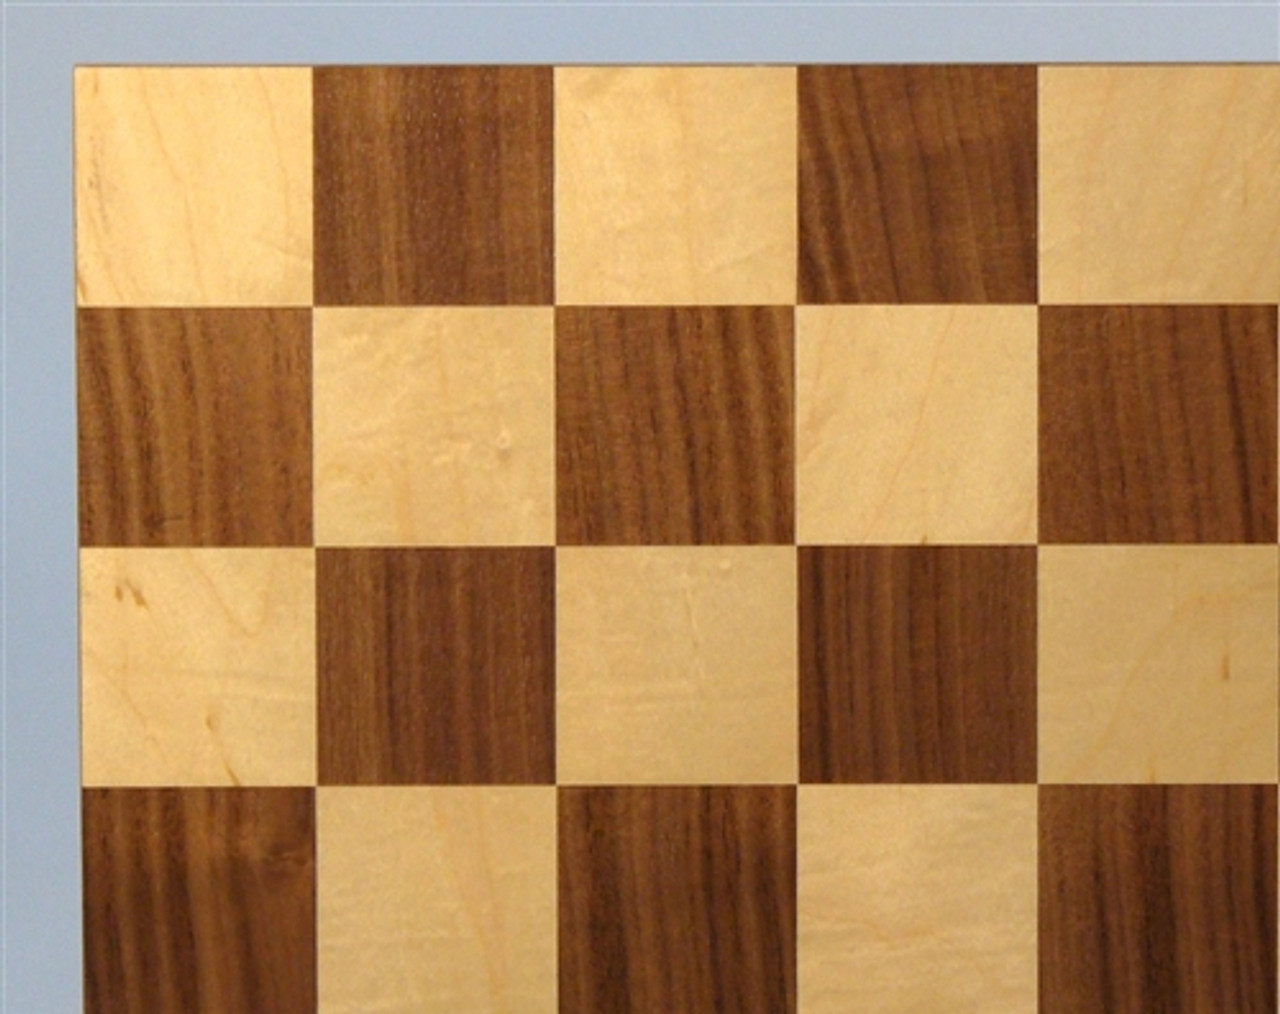  Chess Board: Rosewood & Maple 1.75" Squares close up